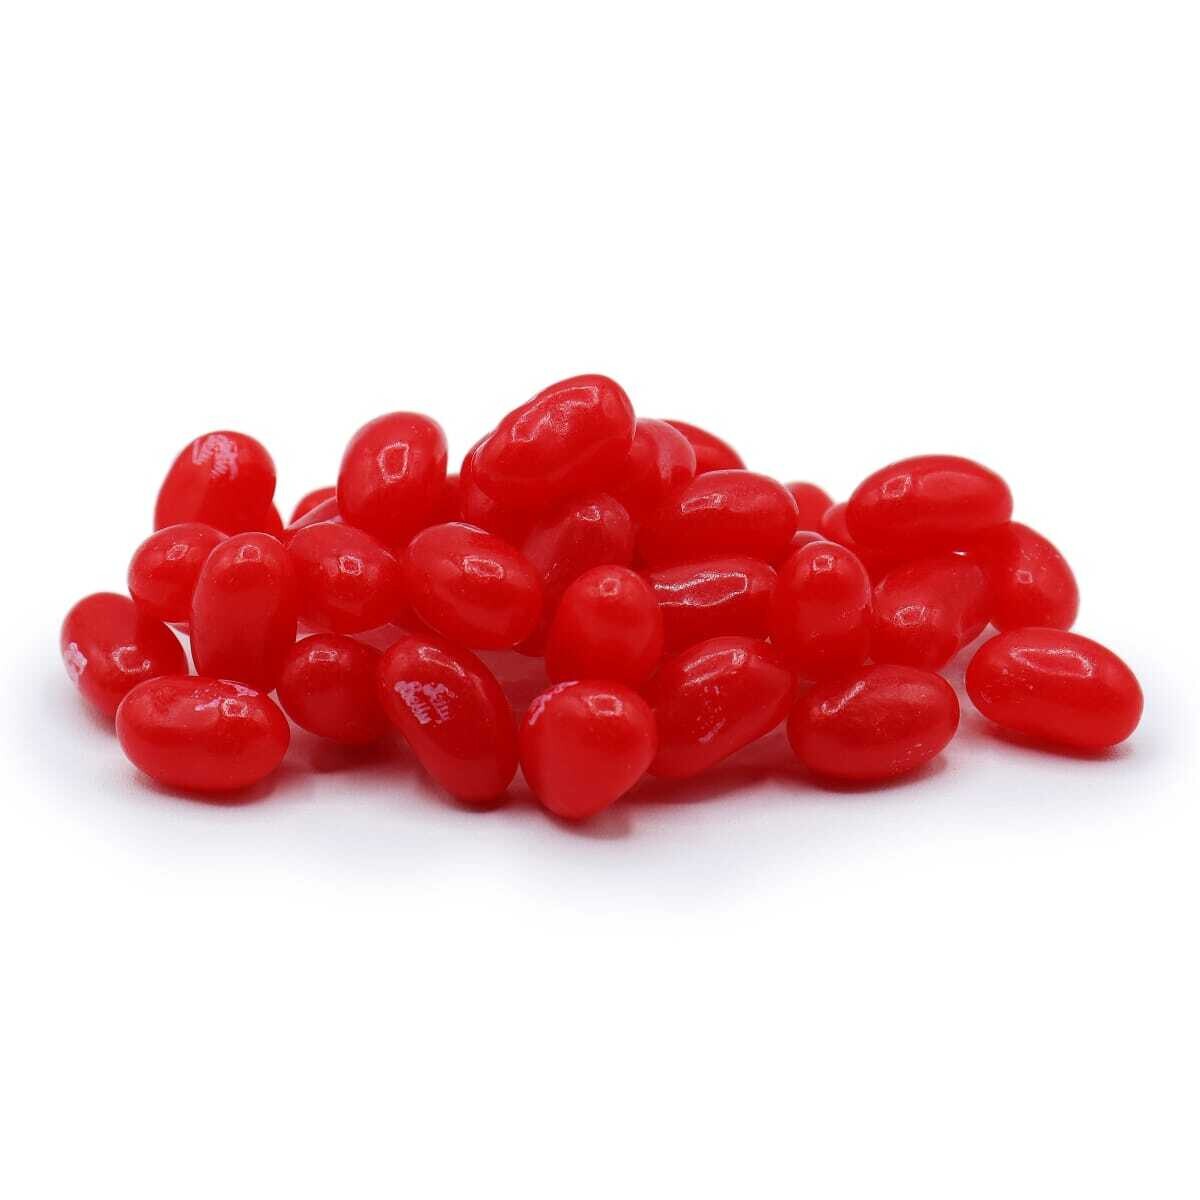 VERY CHERRY - Jelly Belly Jelly Beans